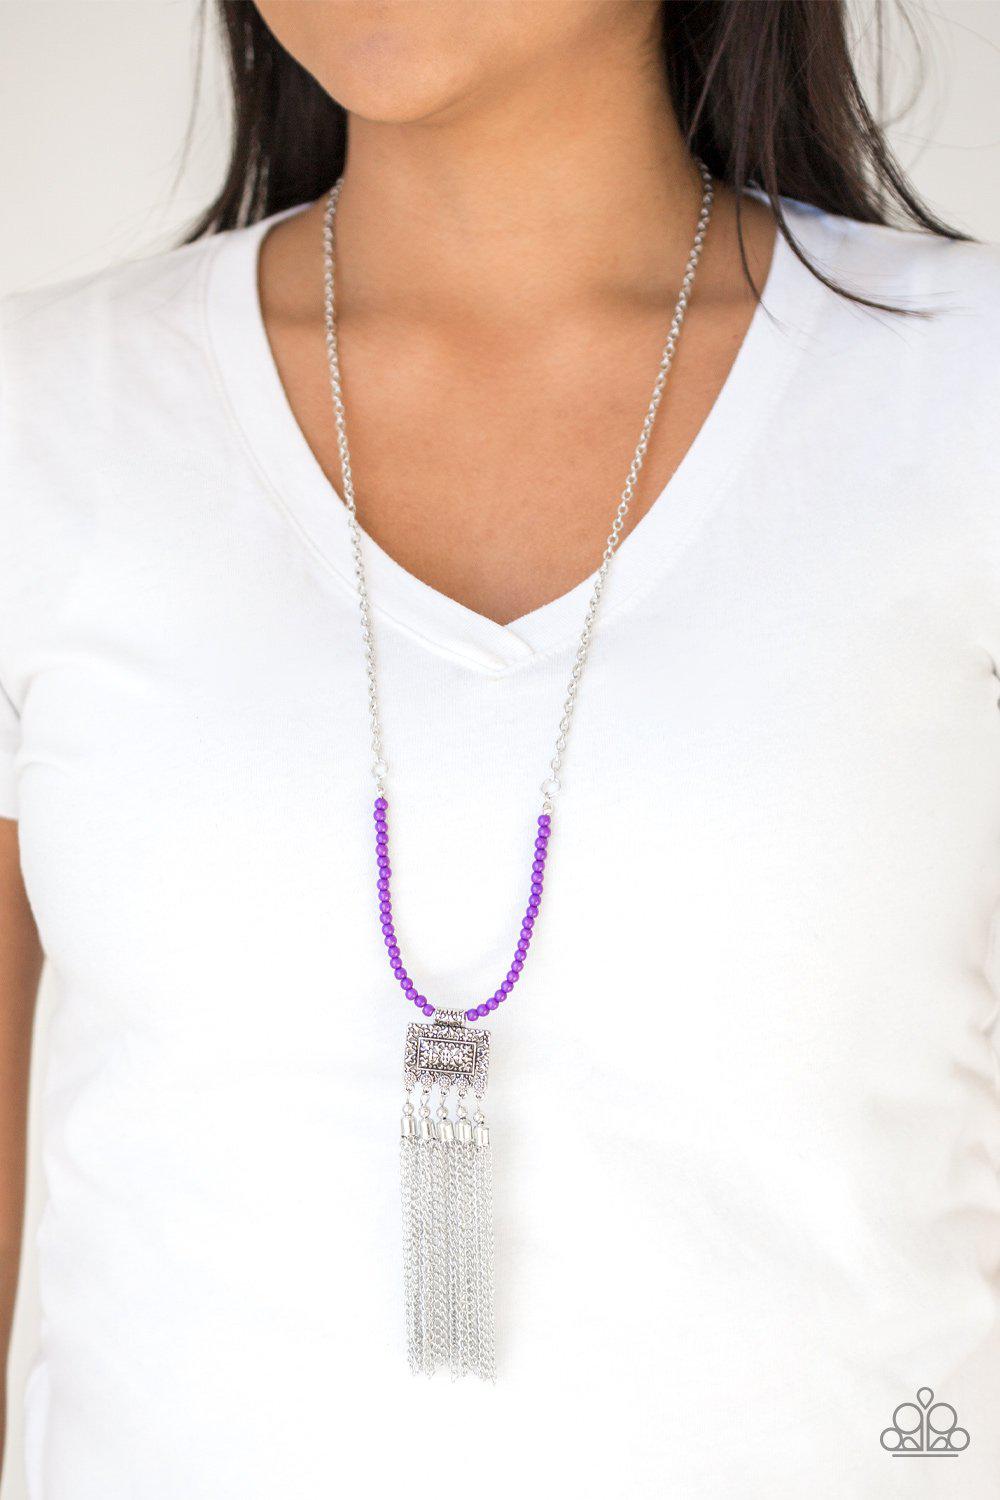 Mayan Masquerade Purple Necklace - Paparazzi Accessories - model -CarasShop.com - $5 Jewelry by Cara Jewels